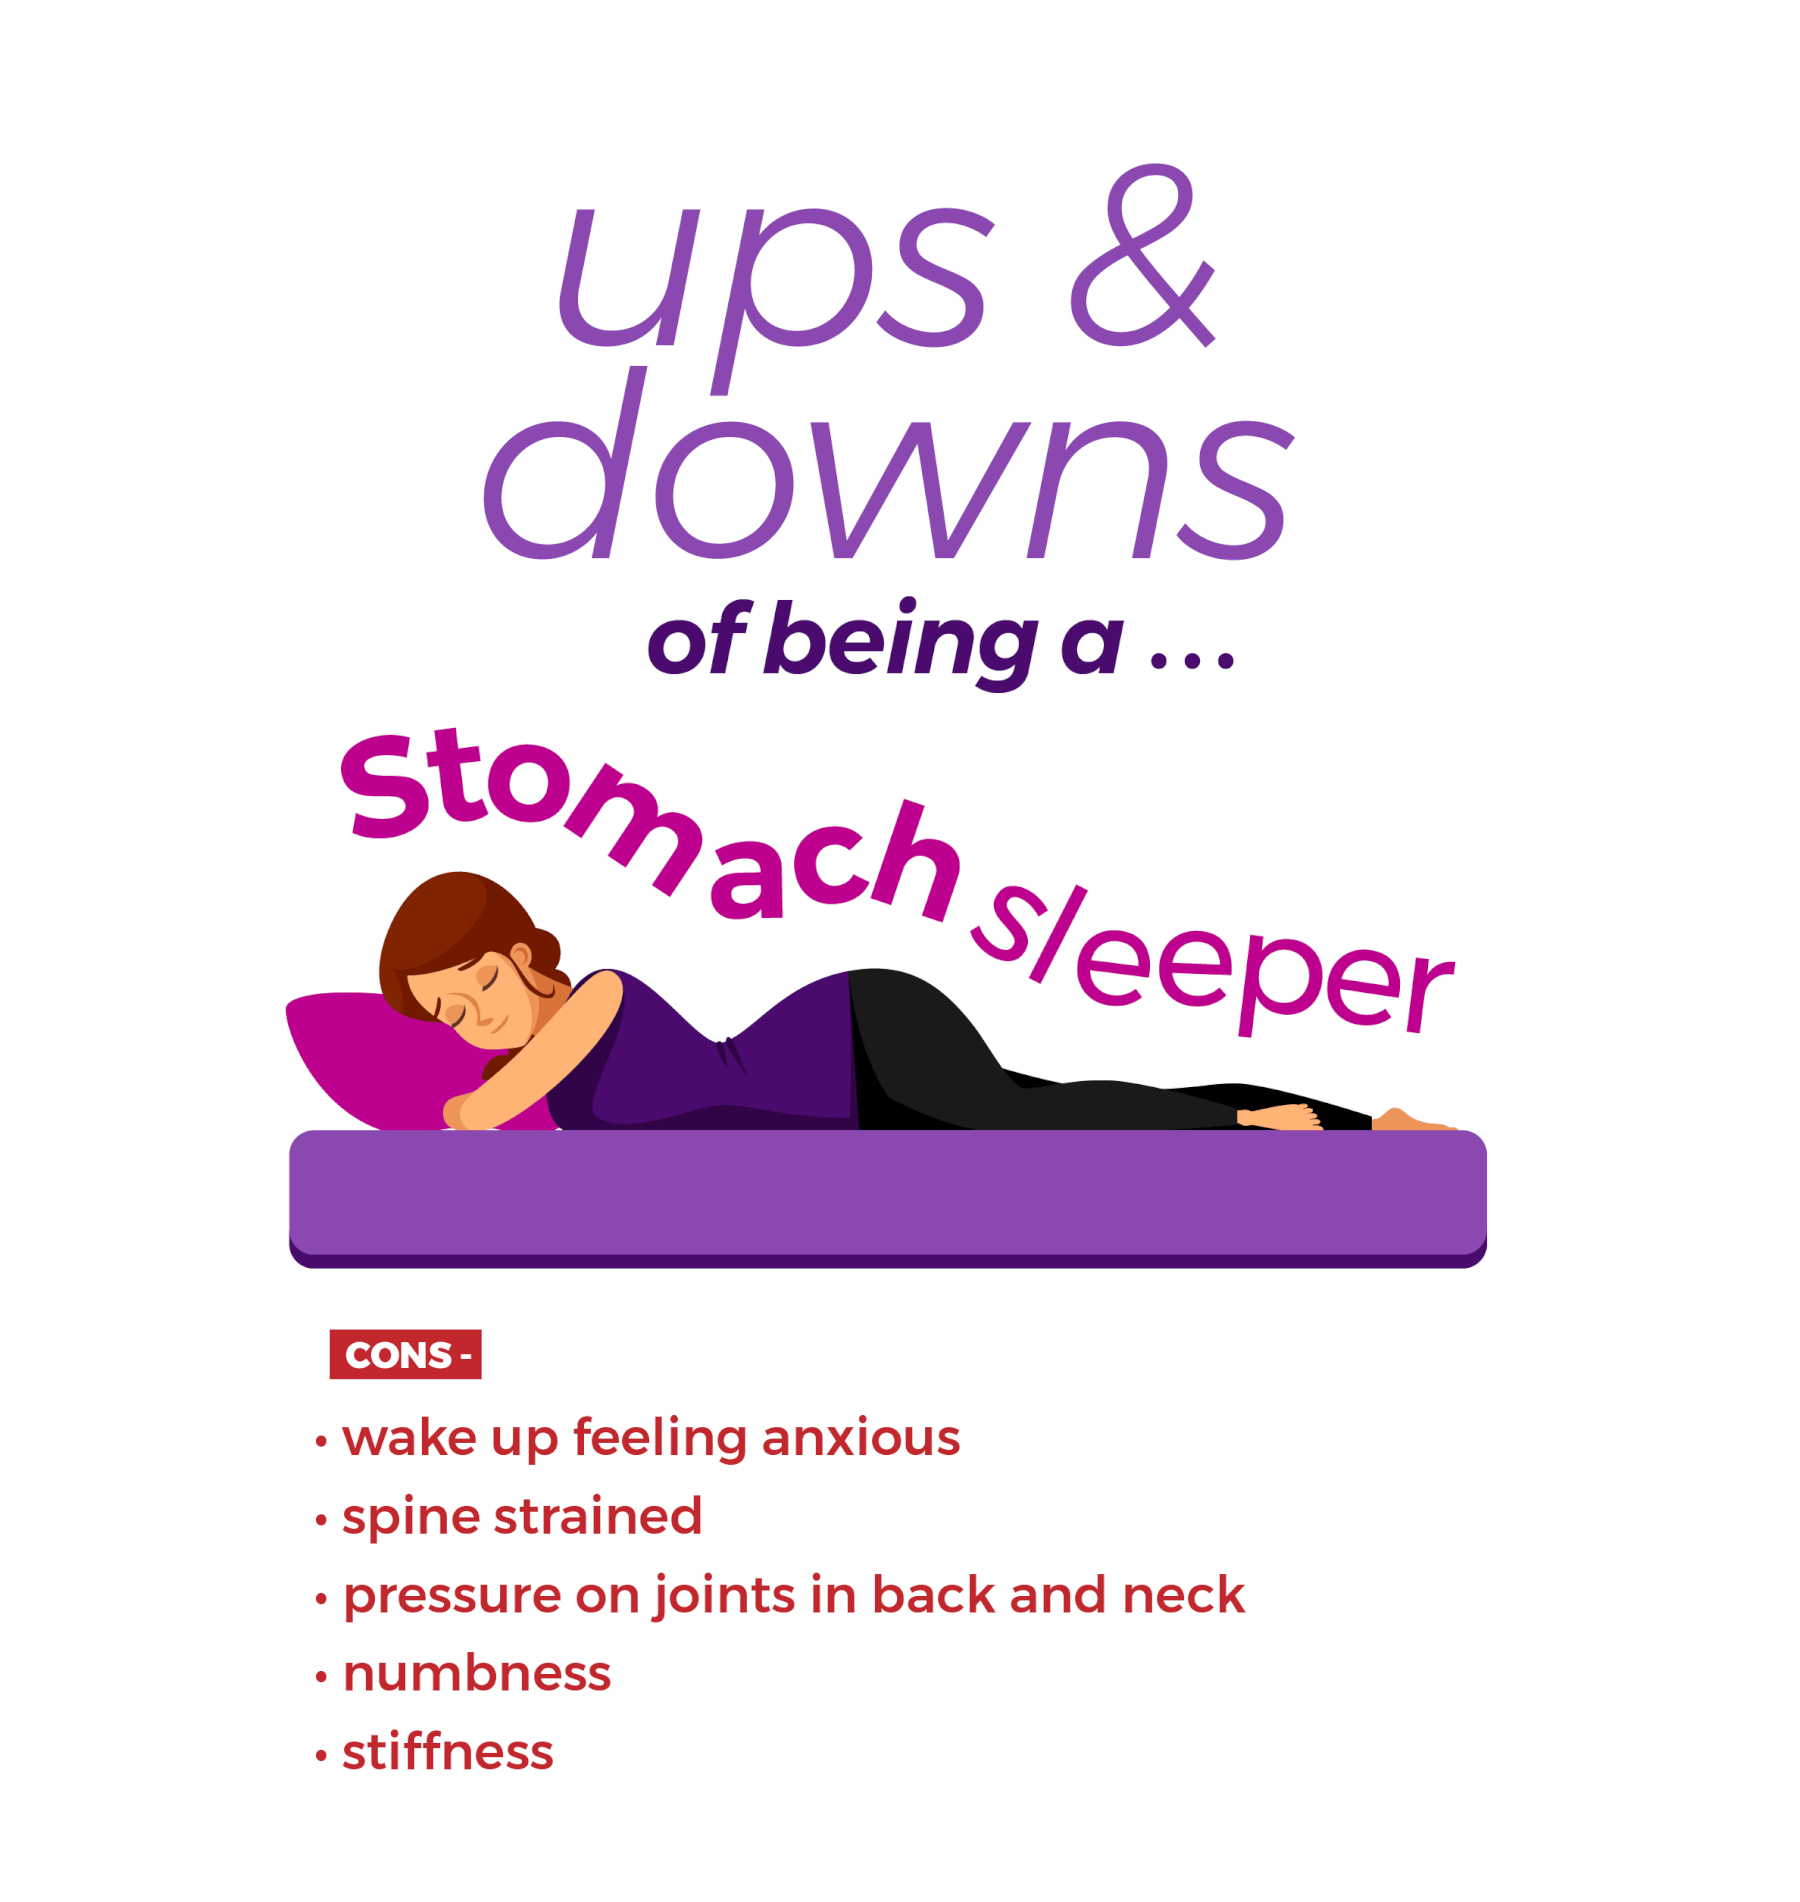 https://purple.com/file/v876988801290029736/general/stomach-sleeper-ups-downs.png